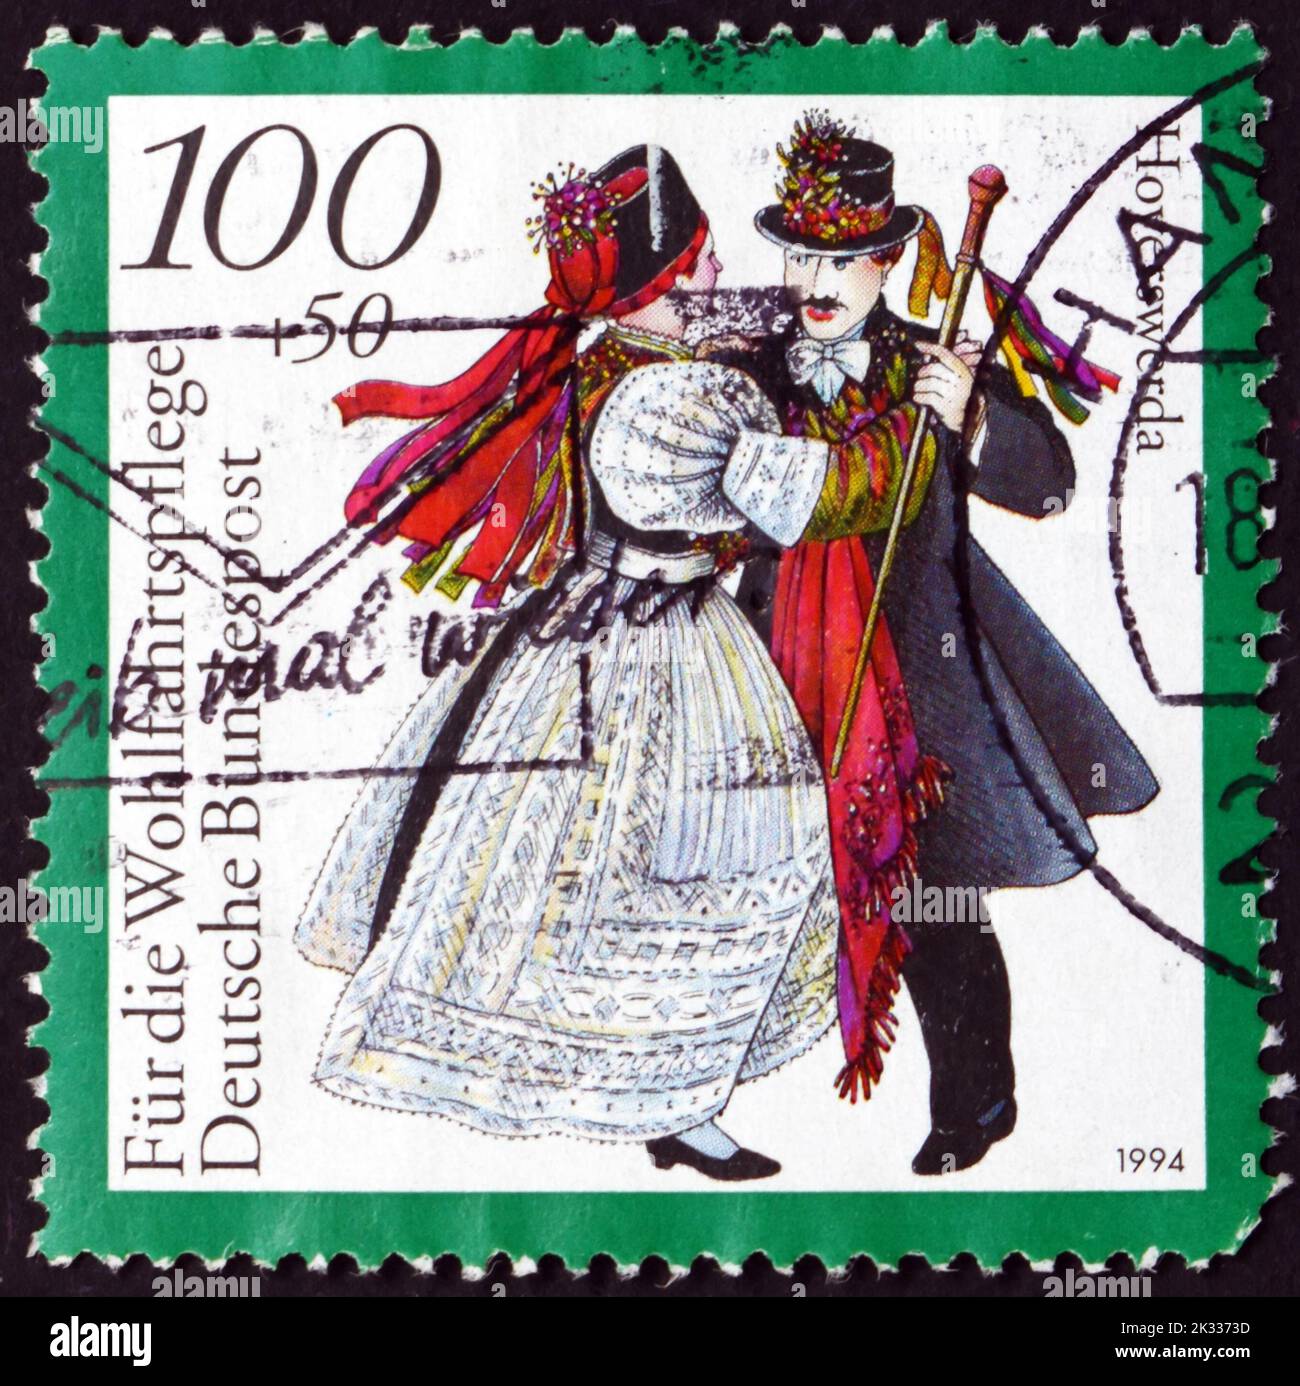 GERMANY - CIRCA 1994: a stamp printed in Germany shows traditional costumes from Hoyerswerda, circa 1994 Stock Photo